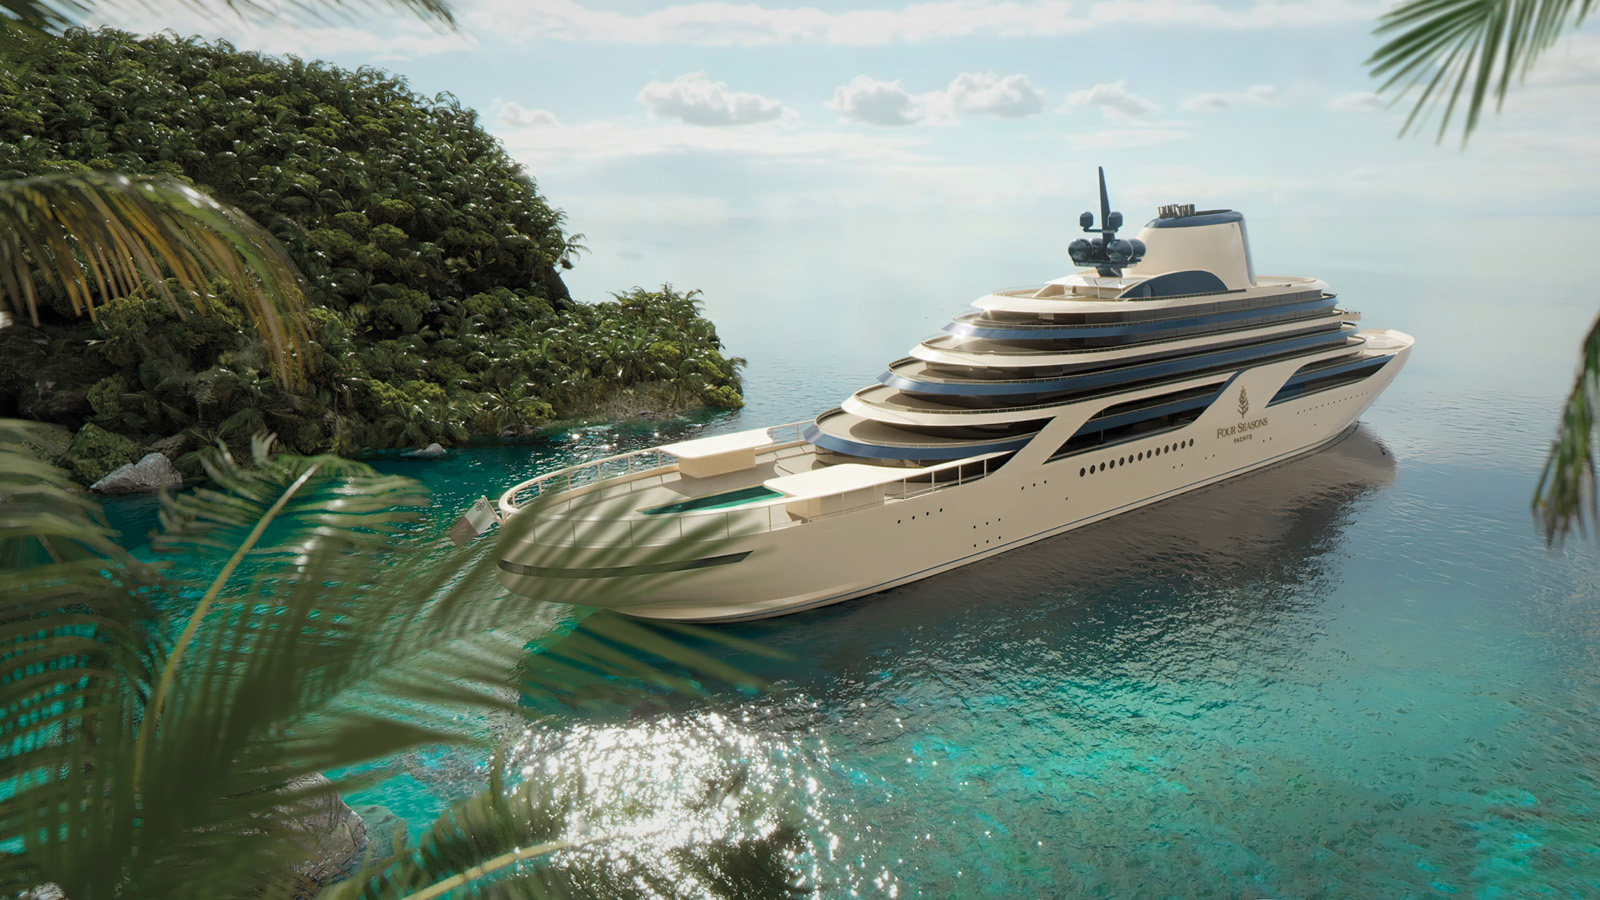 The first Four Seasons yacht (artist’s rendering above) will set sail in 2025. The hotel company is building three luxury yachts costing US$1.2 billion. Photo: courtesy of Four Seasons Yachts/TNS